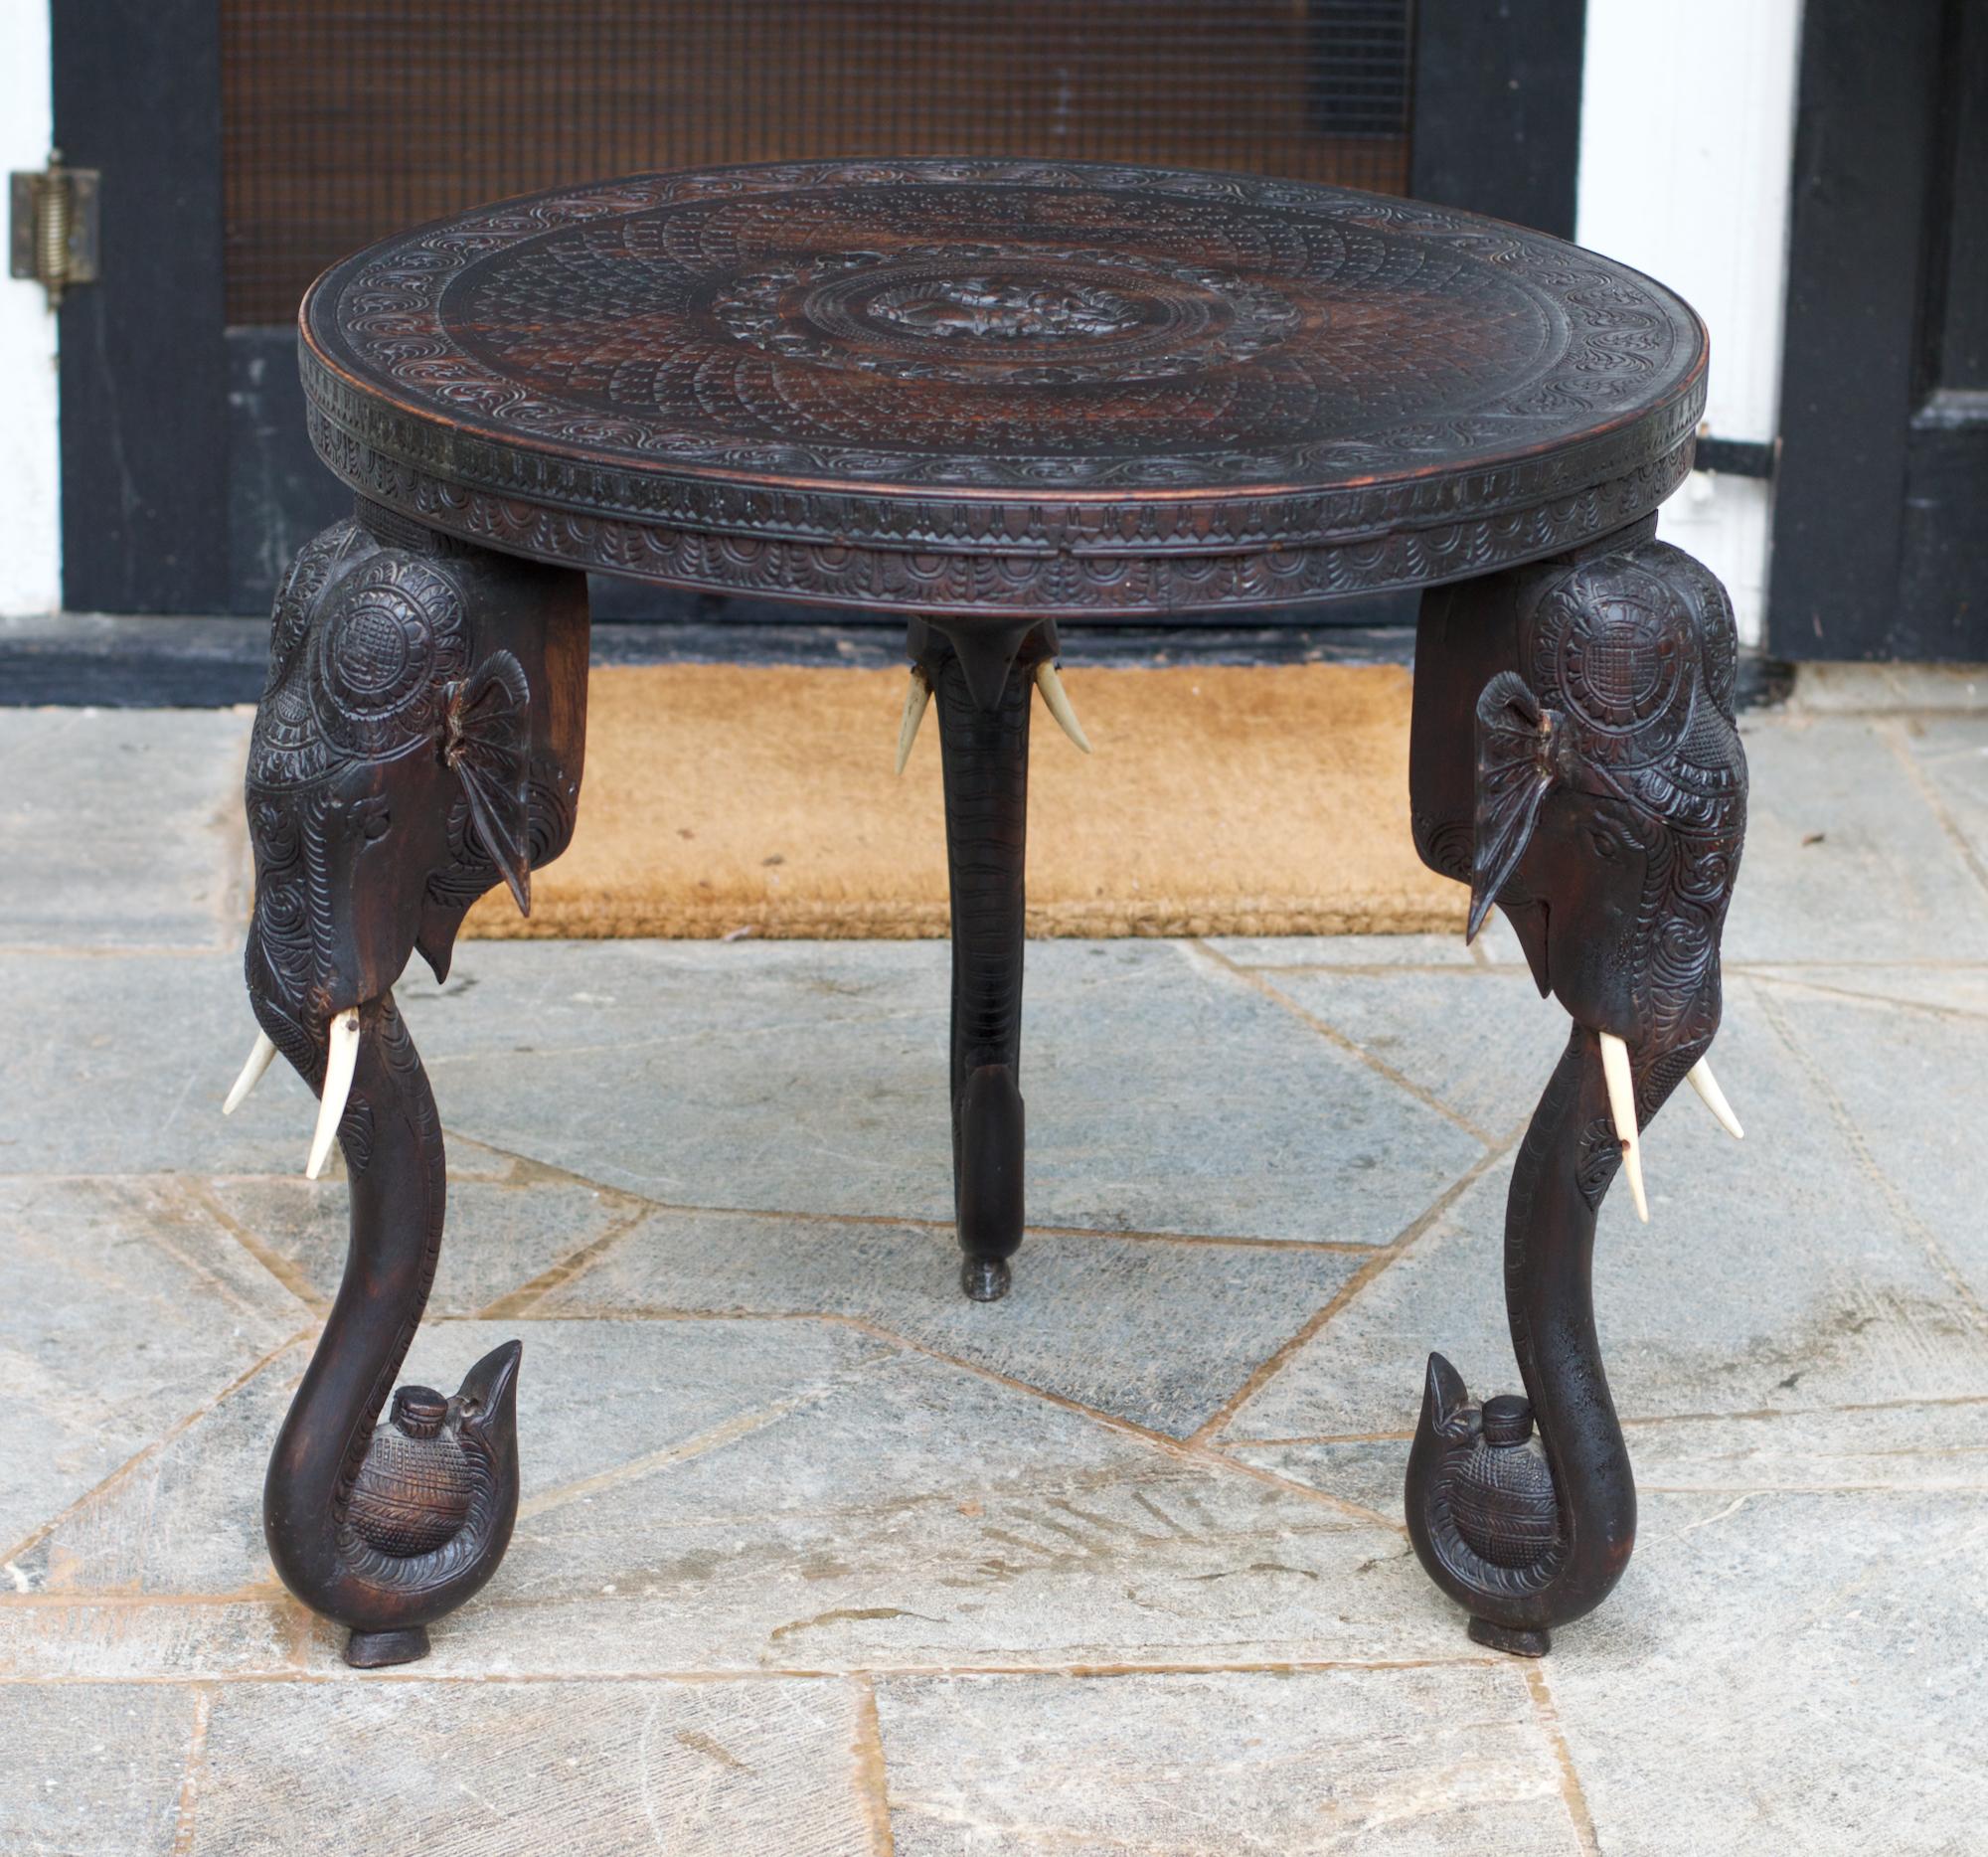 Intricately carved side table having elephant formed legs and a fantastically detailed top. The Asian-Indian produced round end table will supply a stylish and global look wherever one chooses to employ it. Sturdy throughout. Lots of breaks and